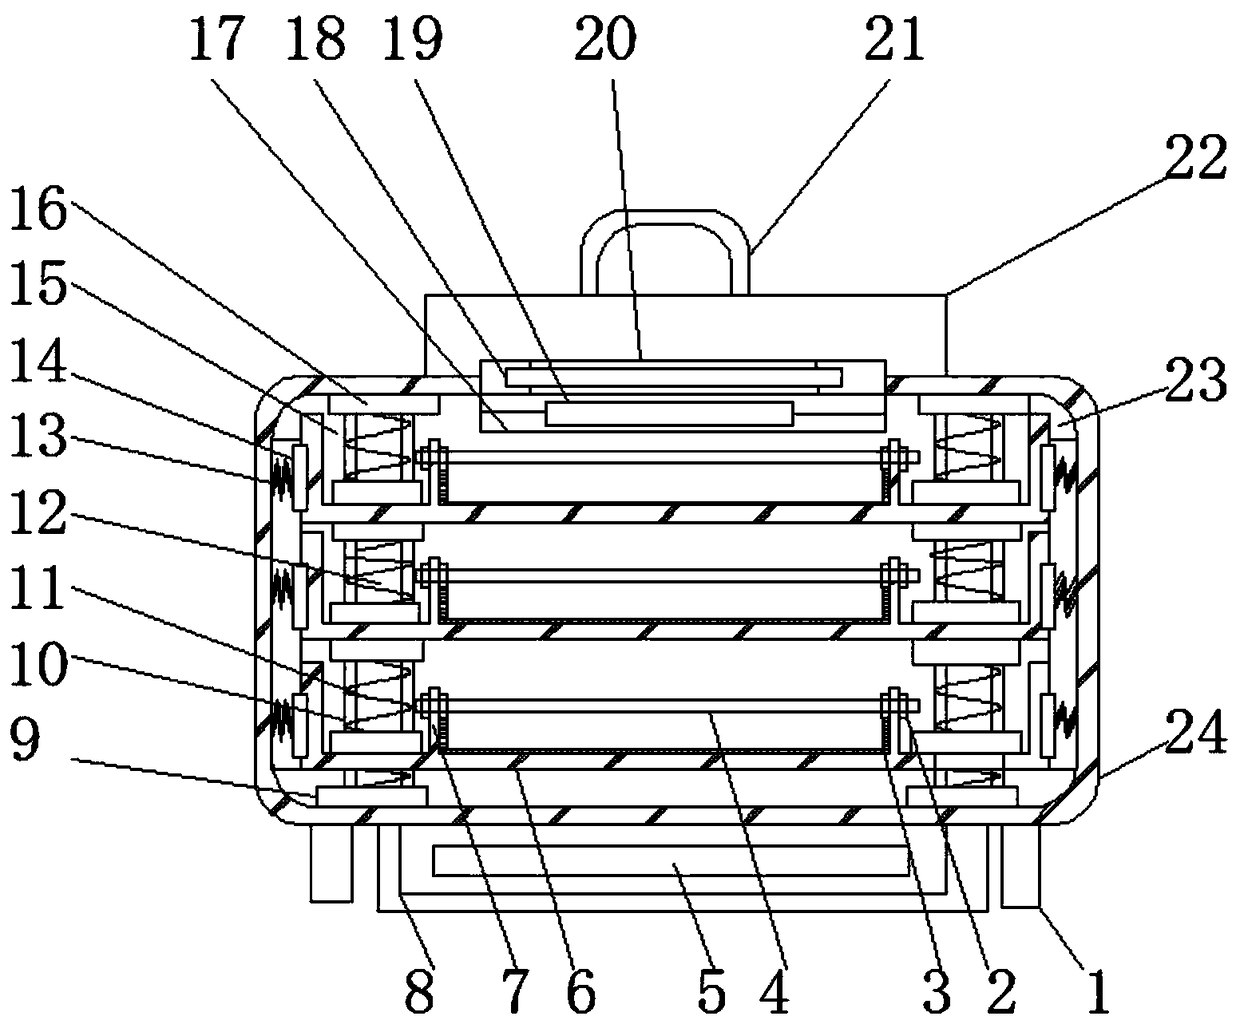 Prefabricated assembling reinforced concrete component delivery device